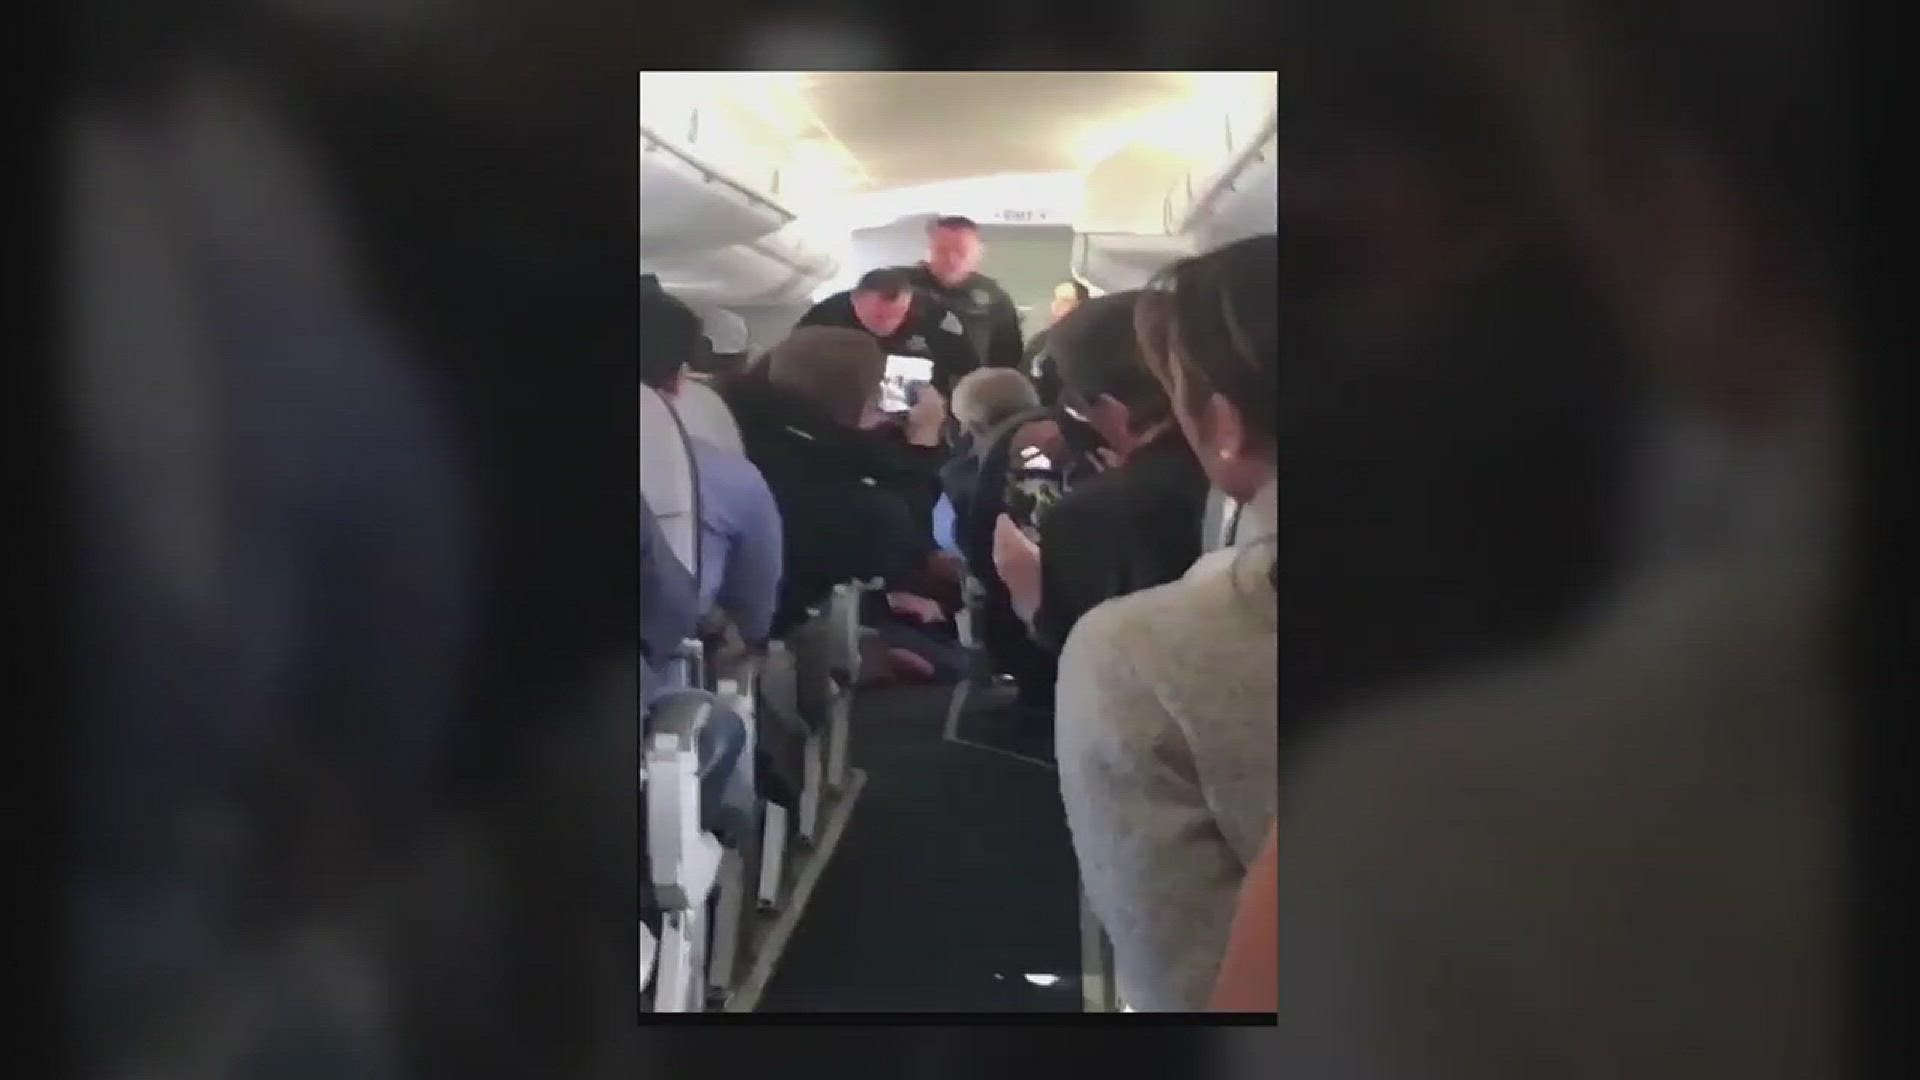 Danny Torres of Meridian captured this video onboard SkyWest flight 5449 from San Francisco to Boise on Monday, when a woman was arrested after attempting to open a cabin door.